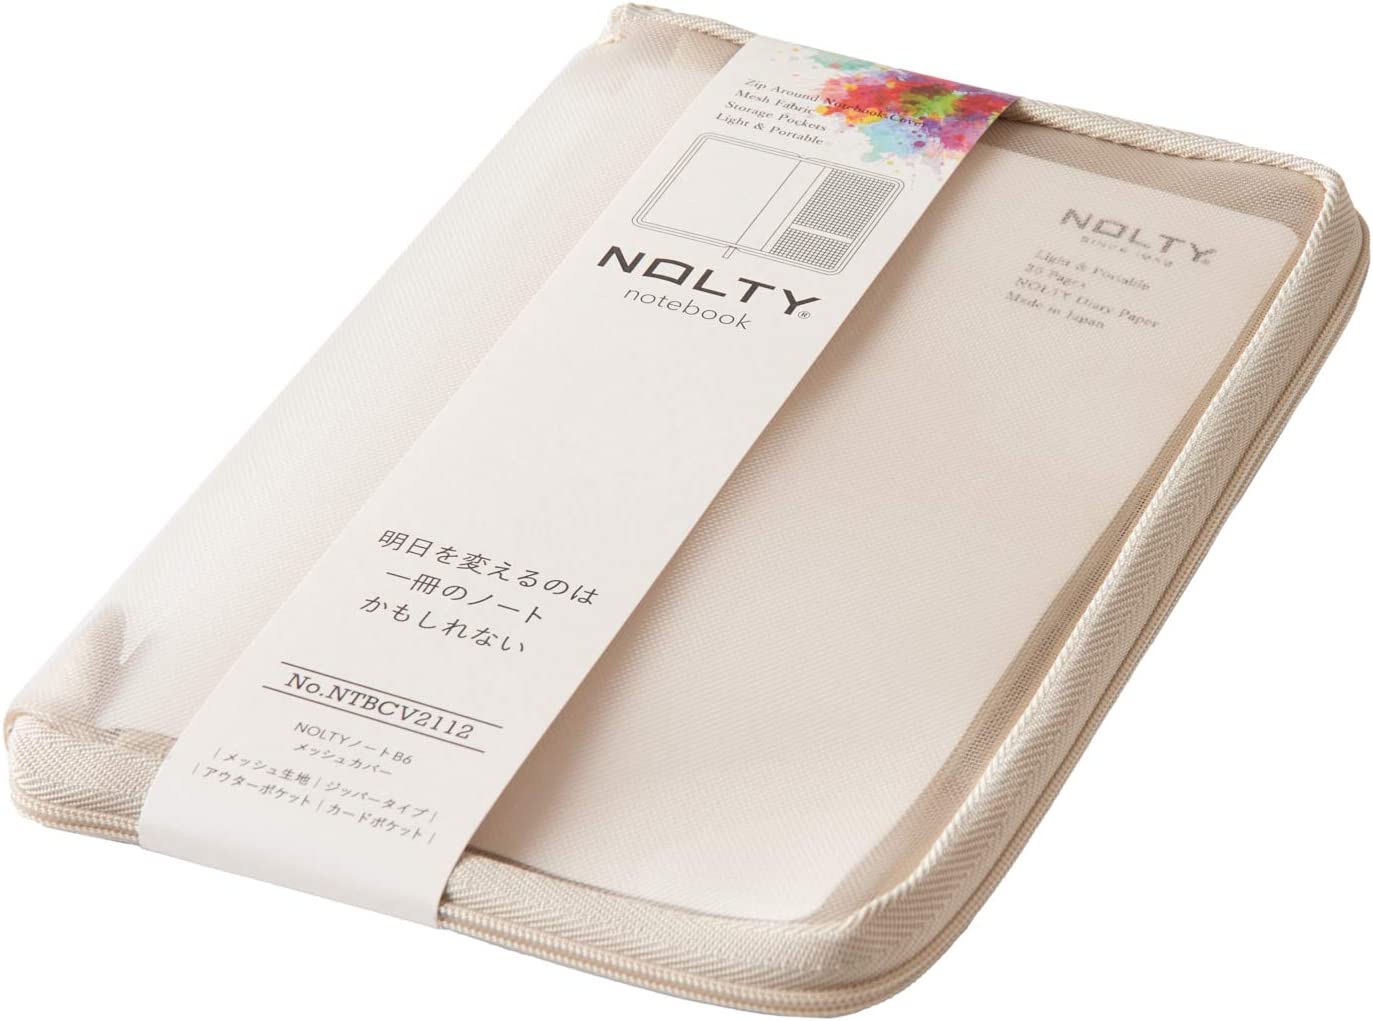 [A5 size] NOLTY mesh notebook cover 